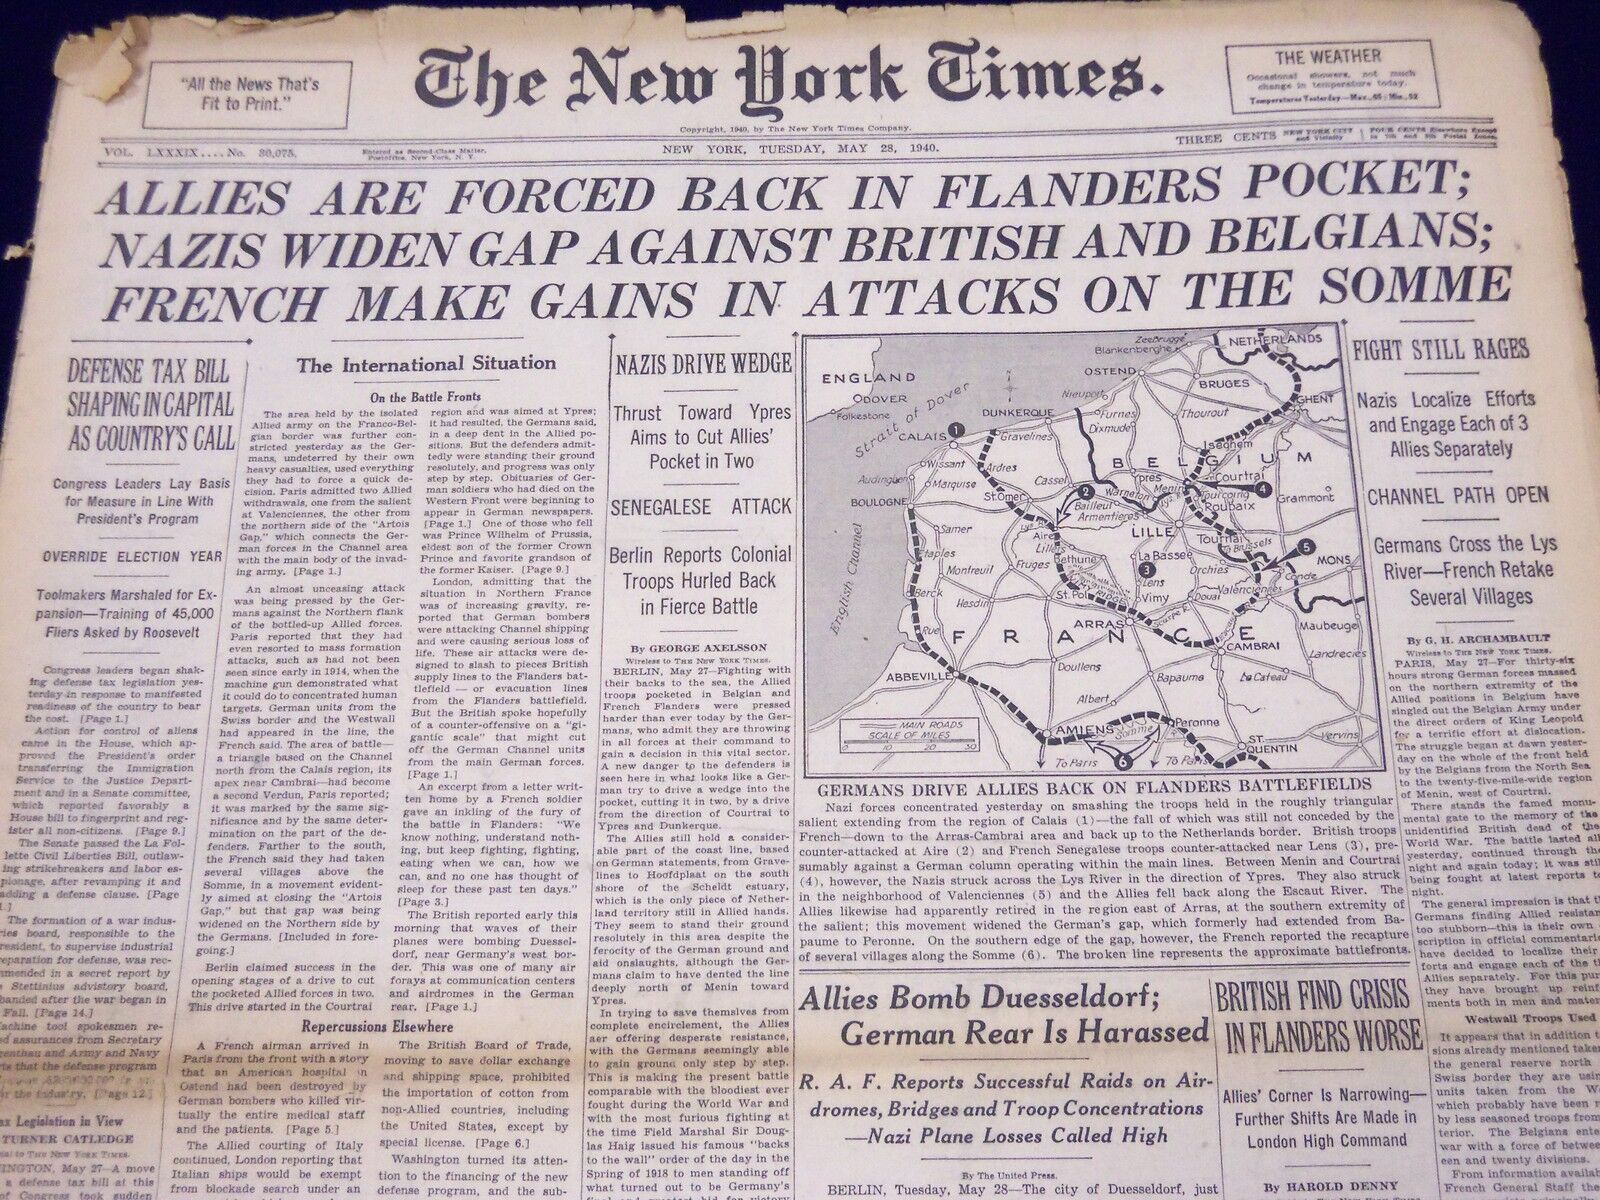 1940 MAY 28 NEW YORK TIMES - ALLIES ARE FORCED BACK IN FLANDERS POCKET - NT 201